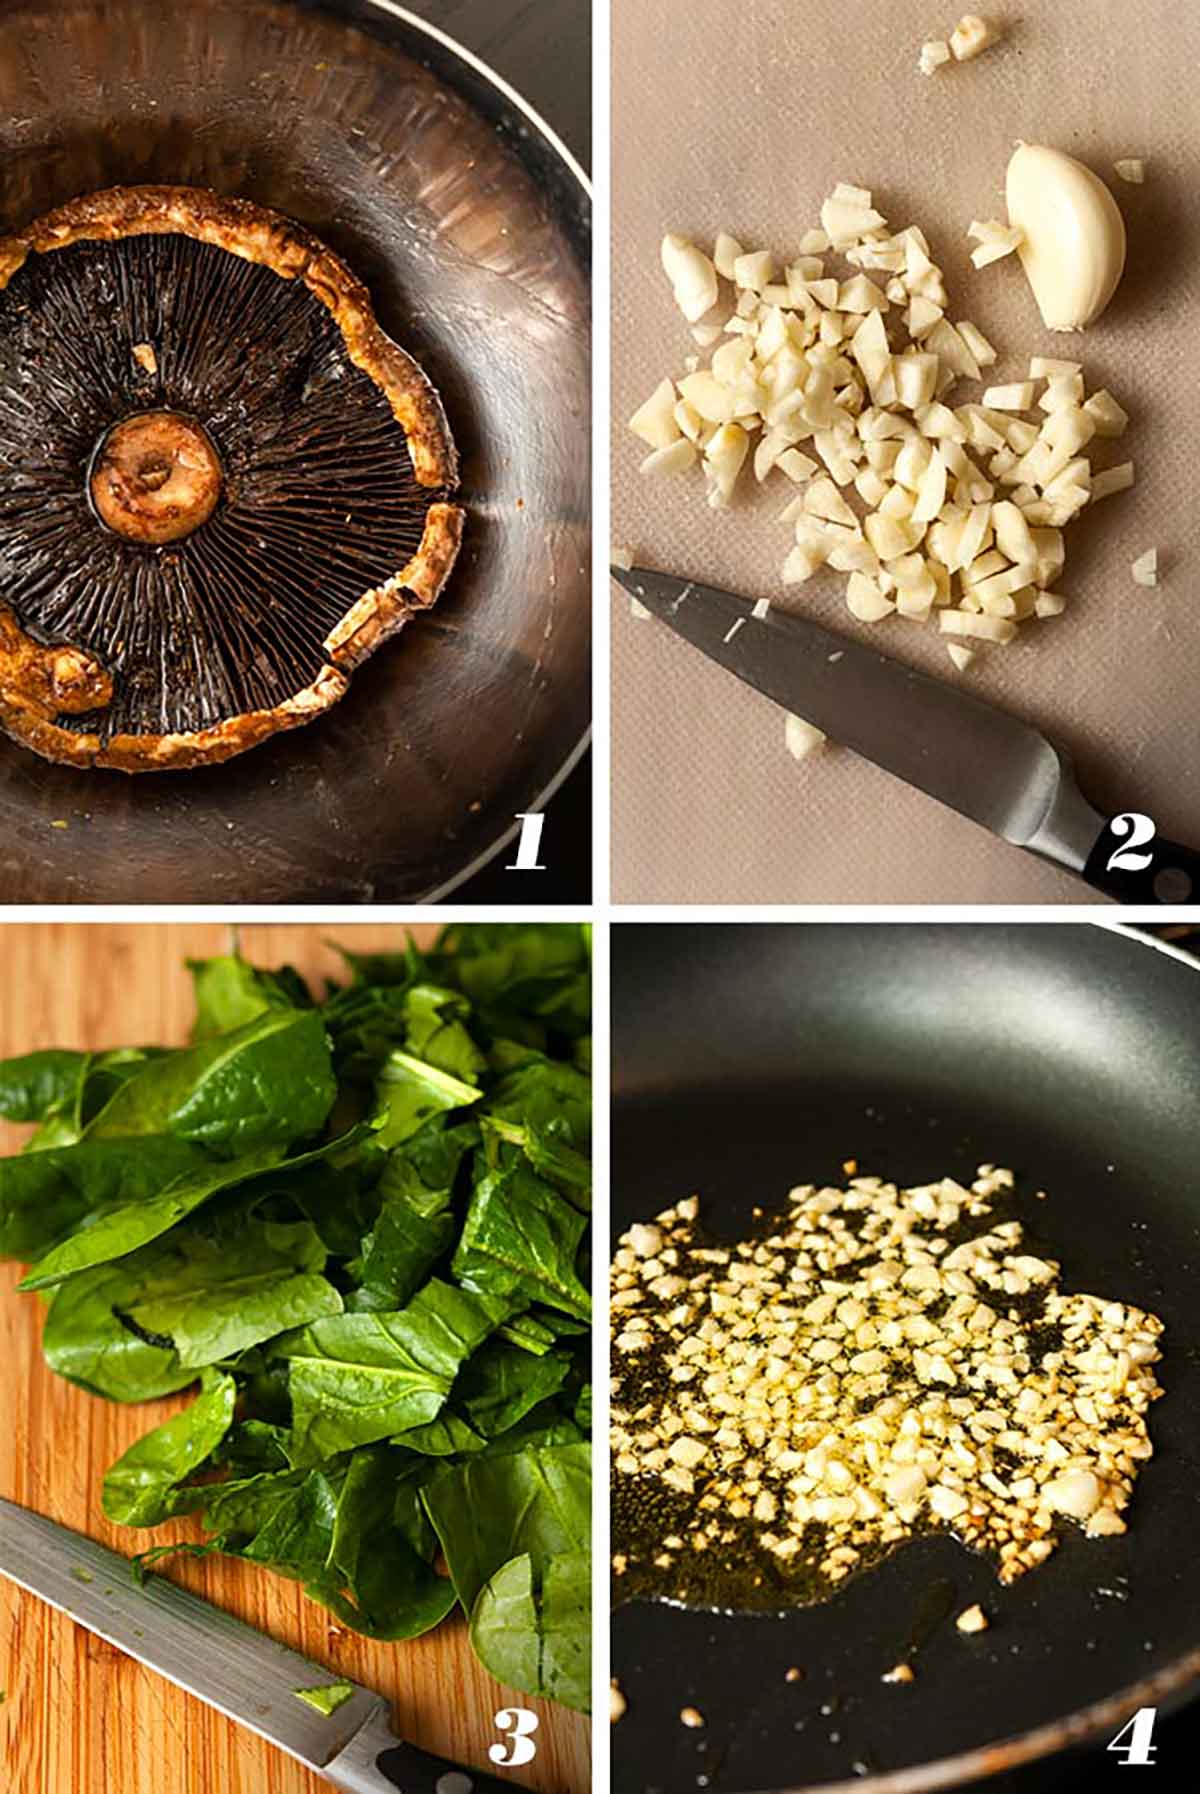 A collage of 4 numbered images showing how to make stuffed portobello mushrooms.